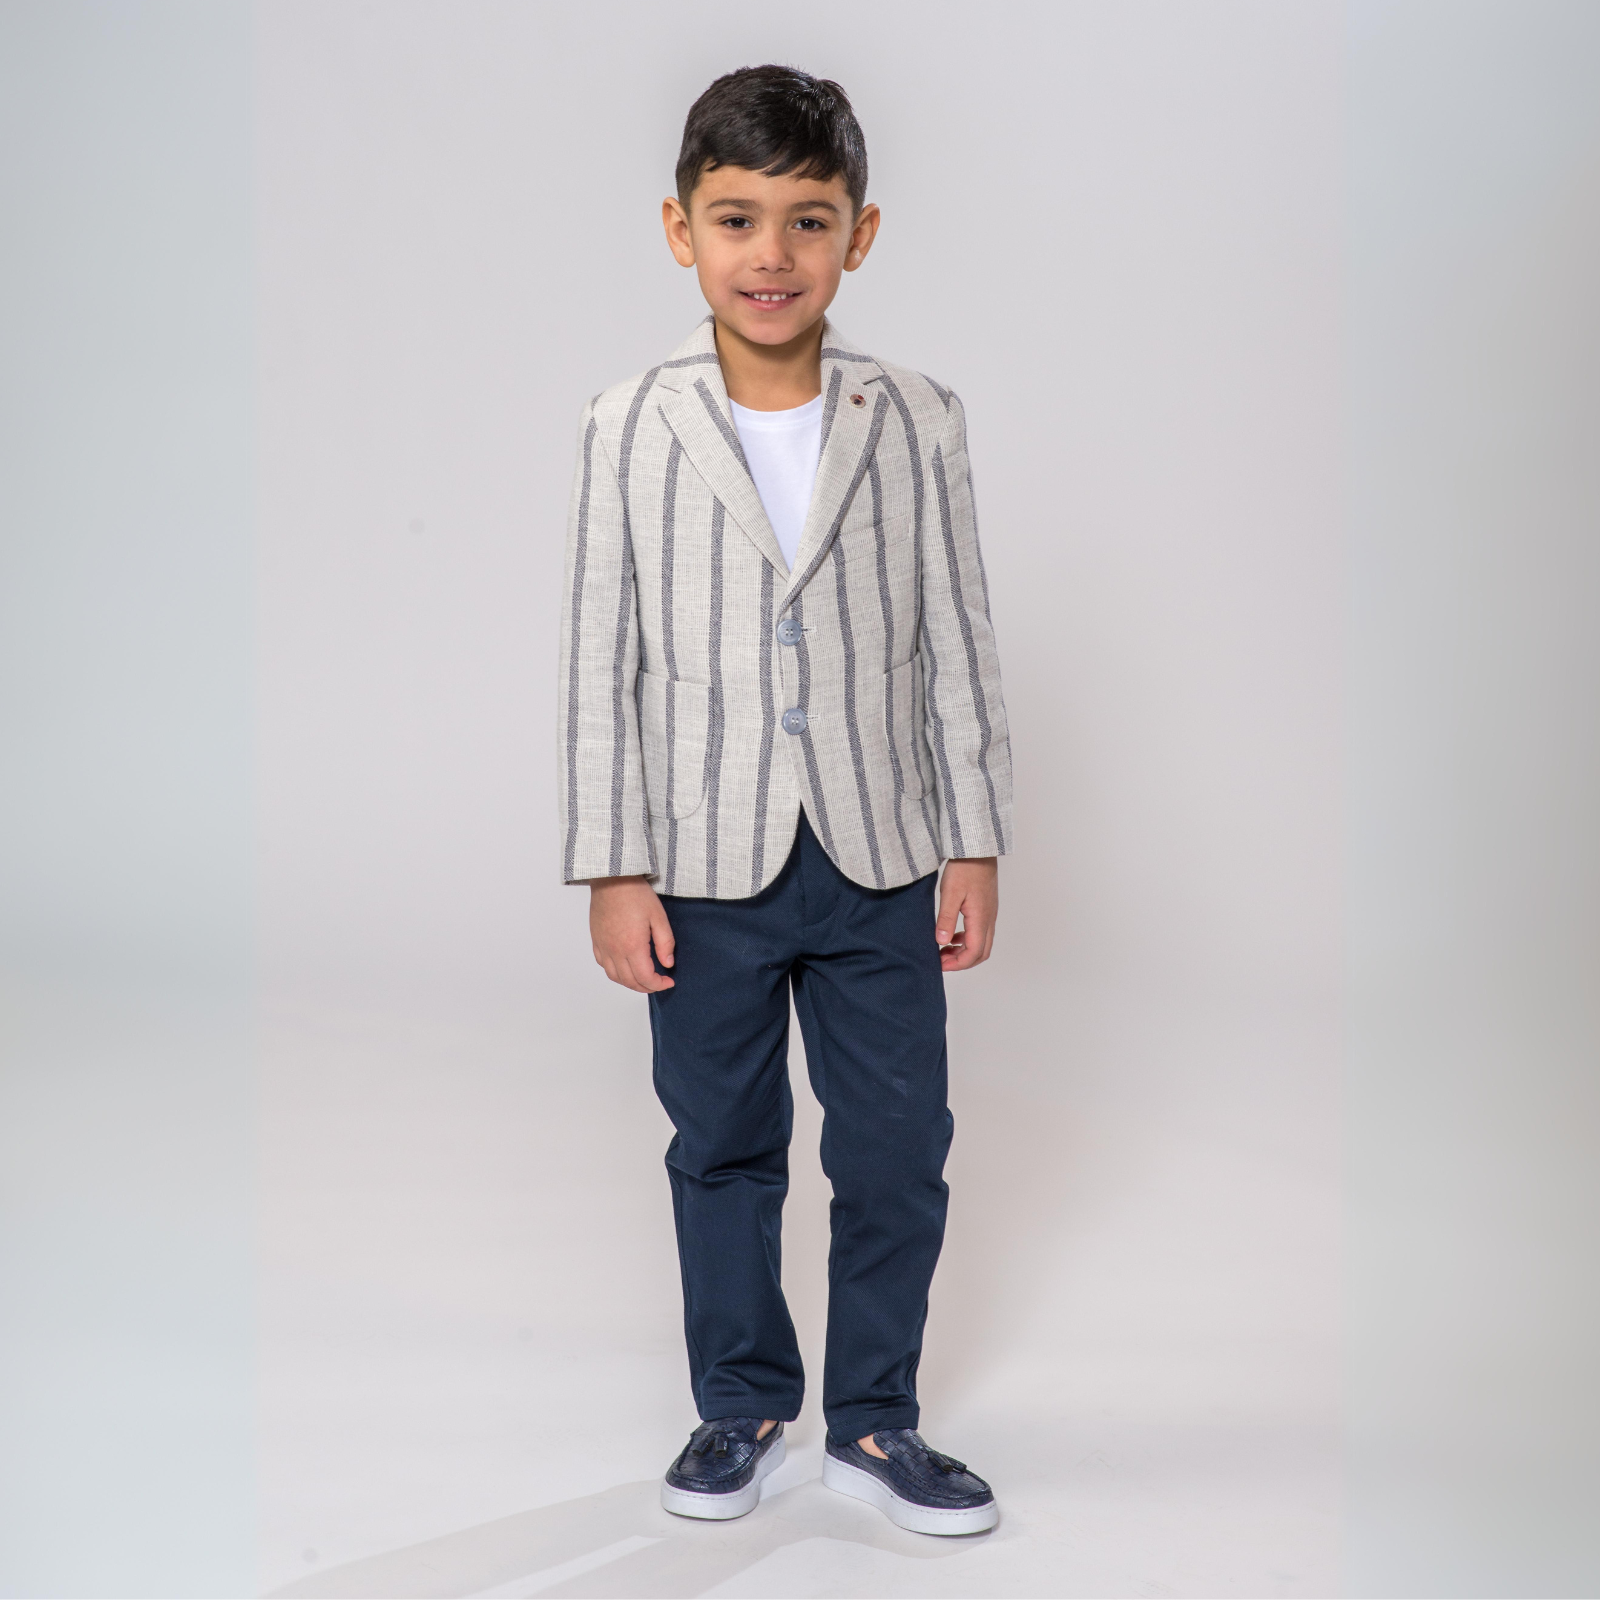 Chico Charles Boys Cool Suit